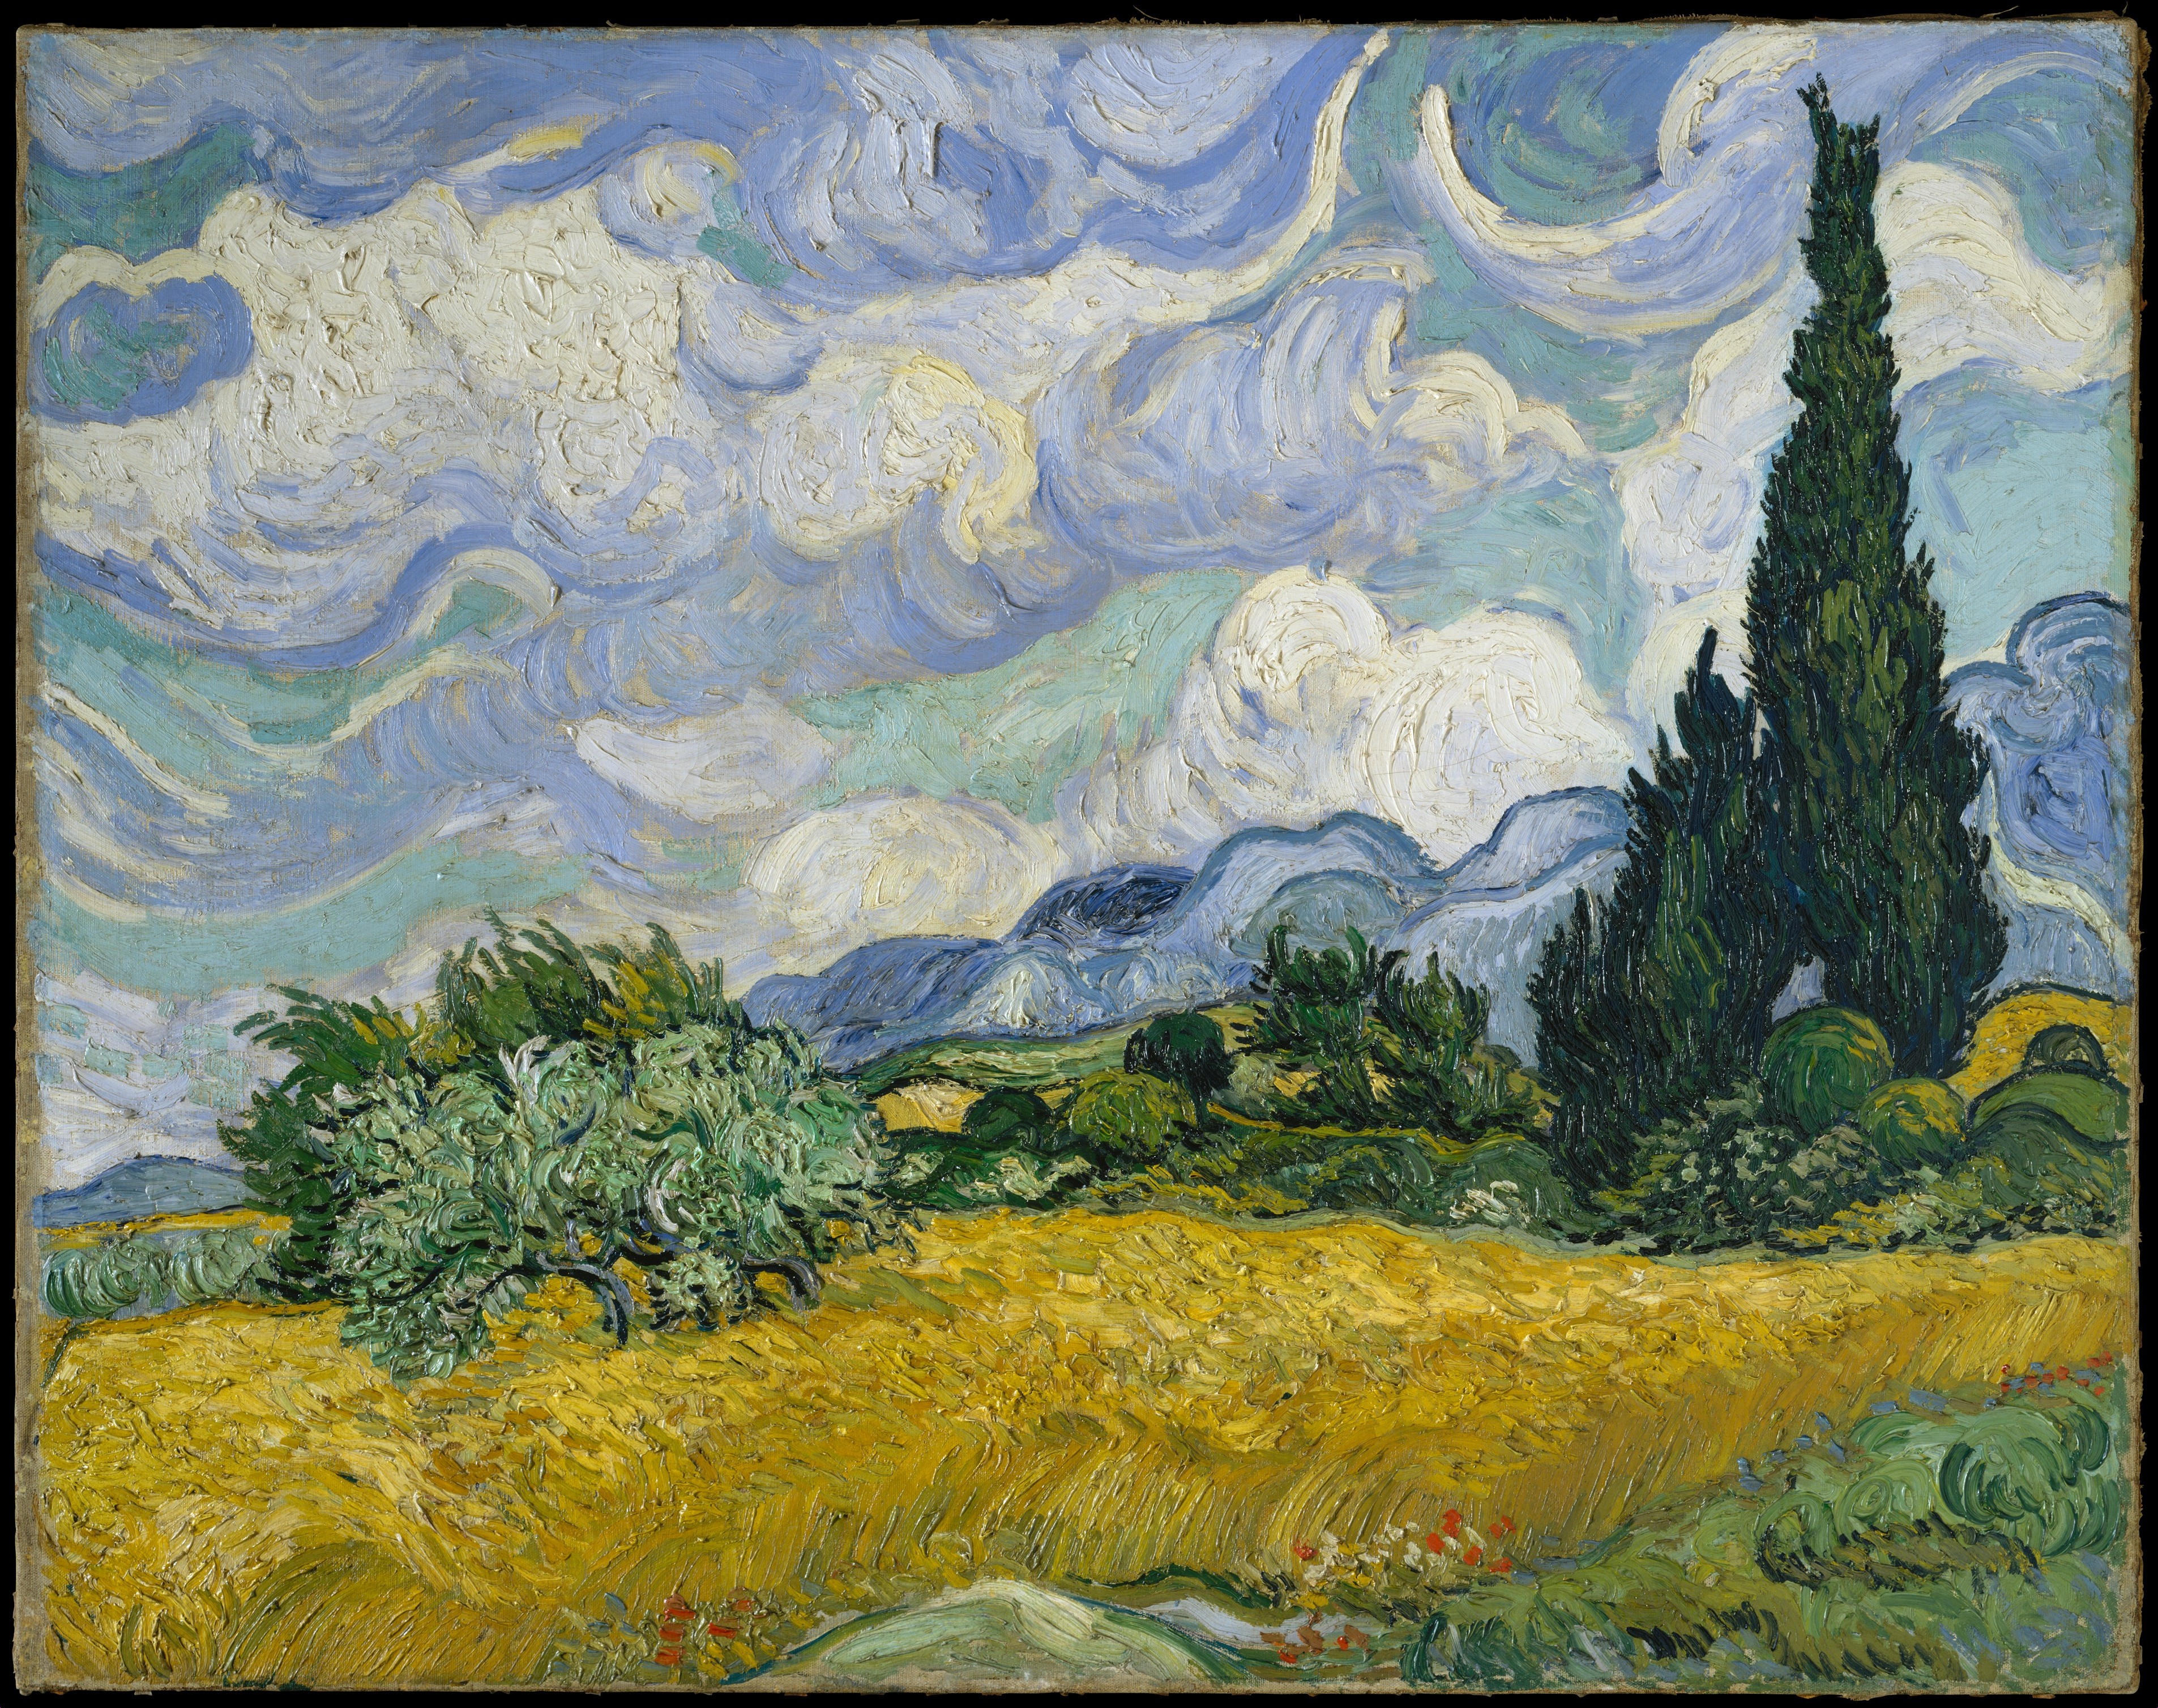 Vincent van Gogh  Wheat Field with Cypresses  The Metropolitan